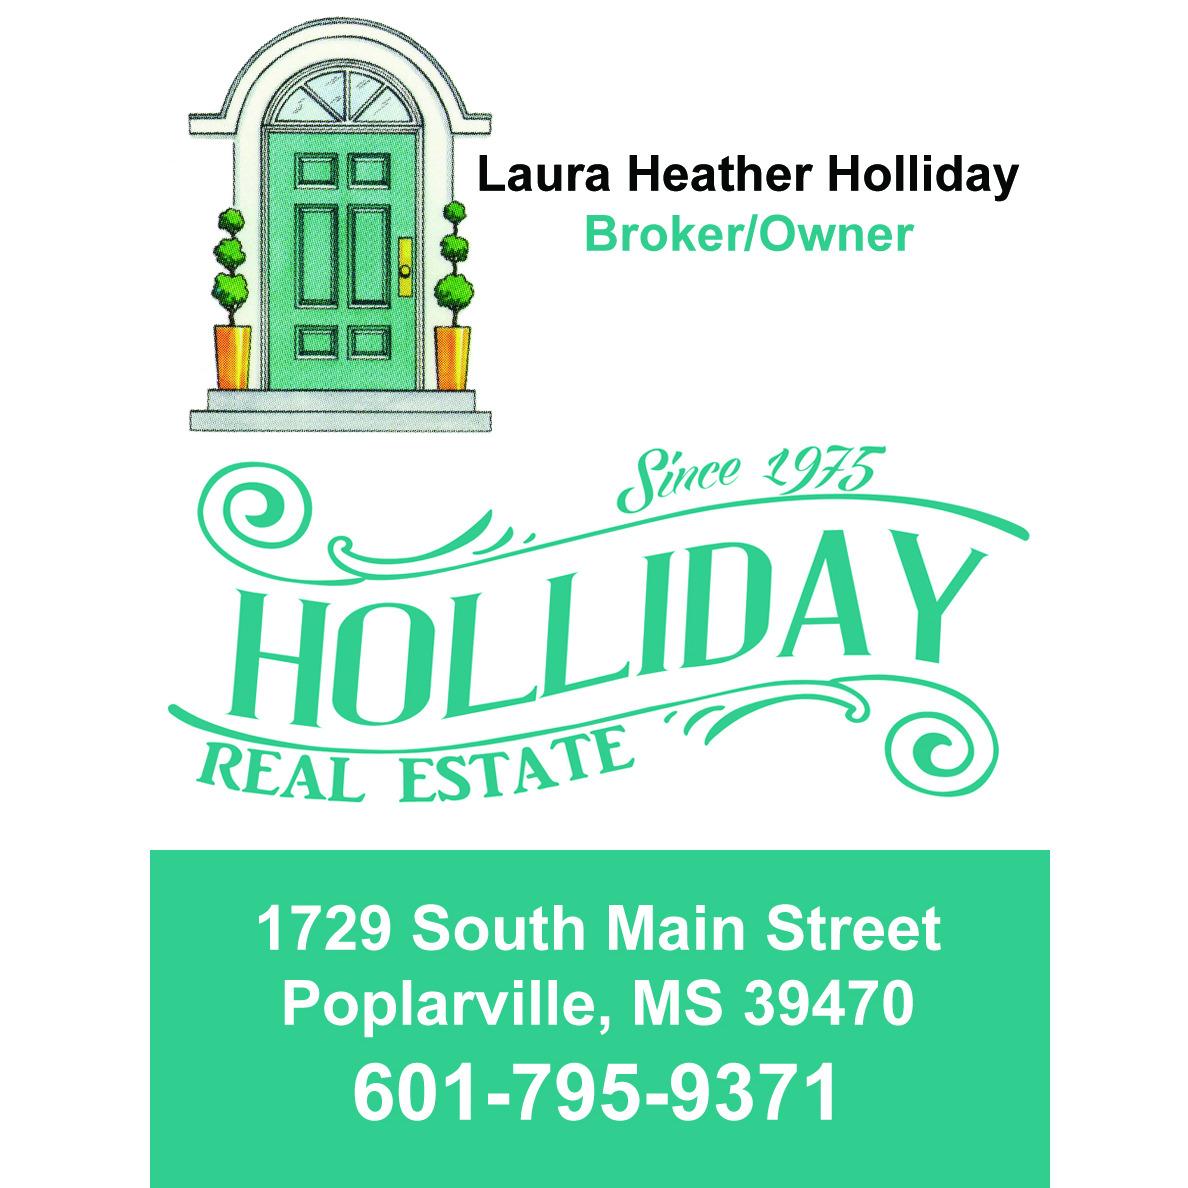 Holliday Real Estate